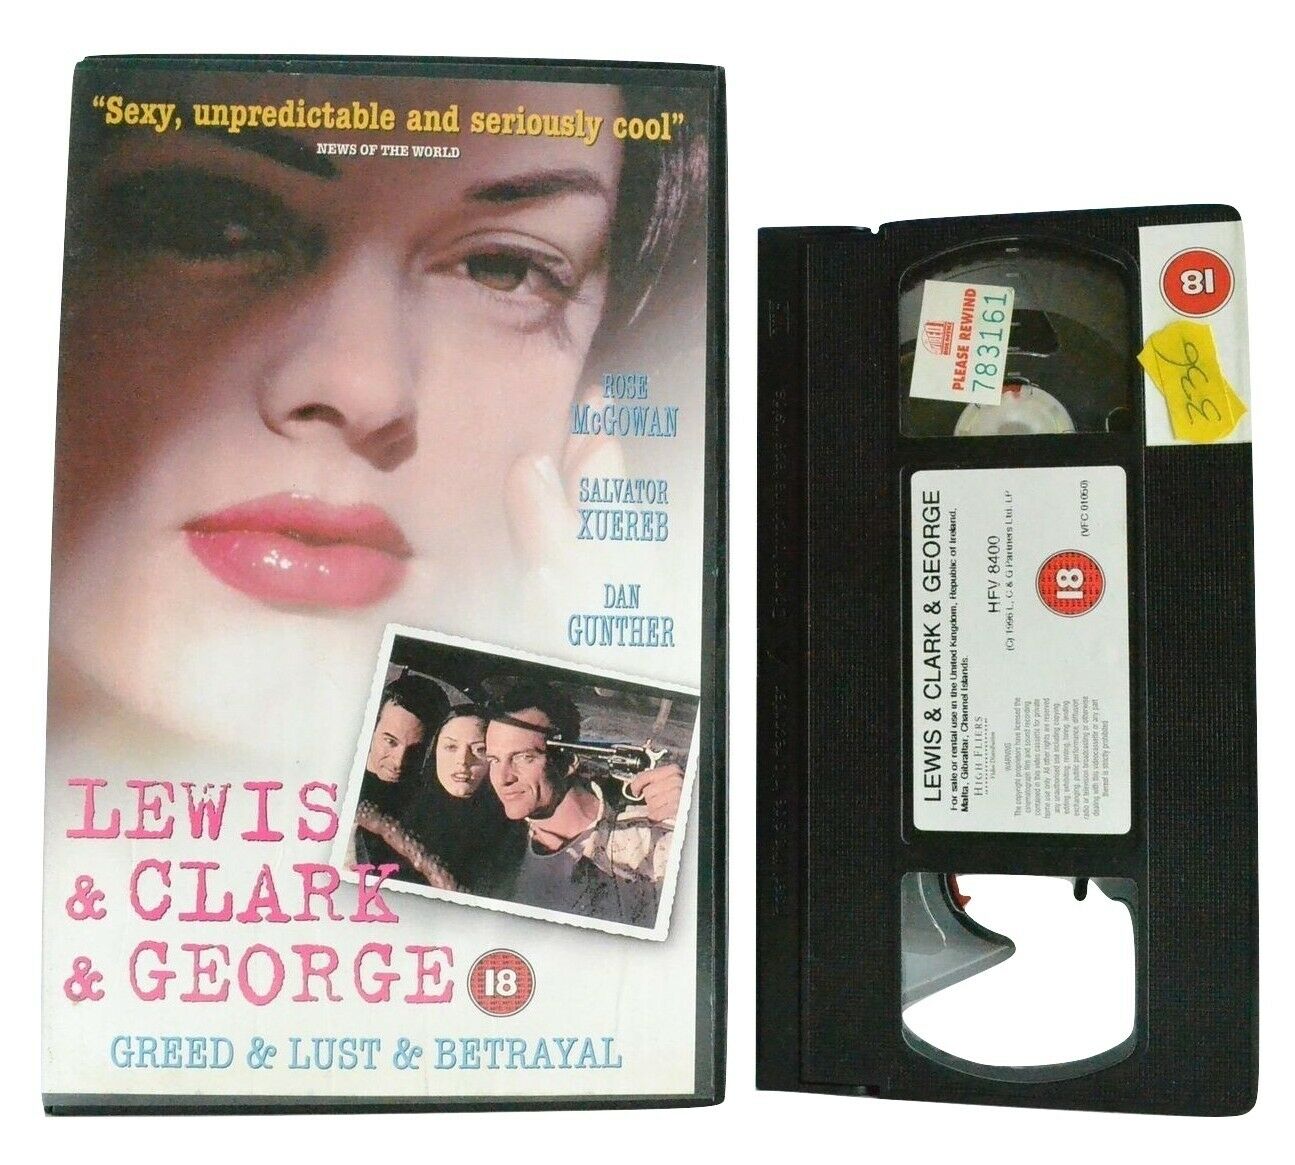 Lewis And Clark And George: Crime Comedy - Road Trip To Find The Treasure - VHS-